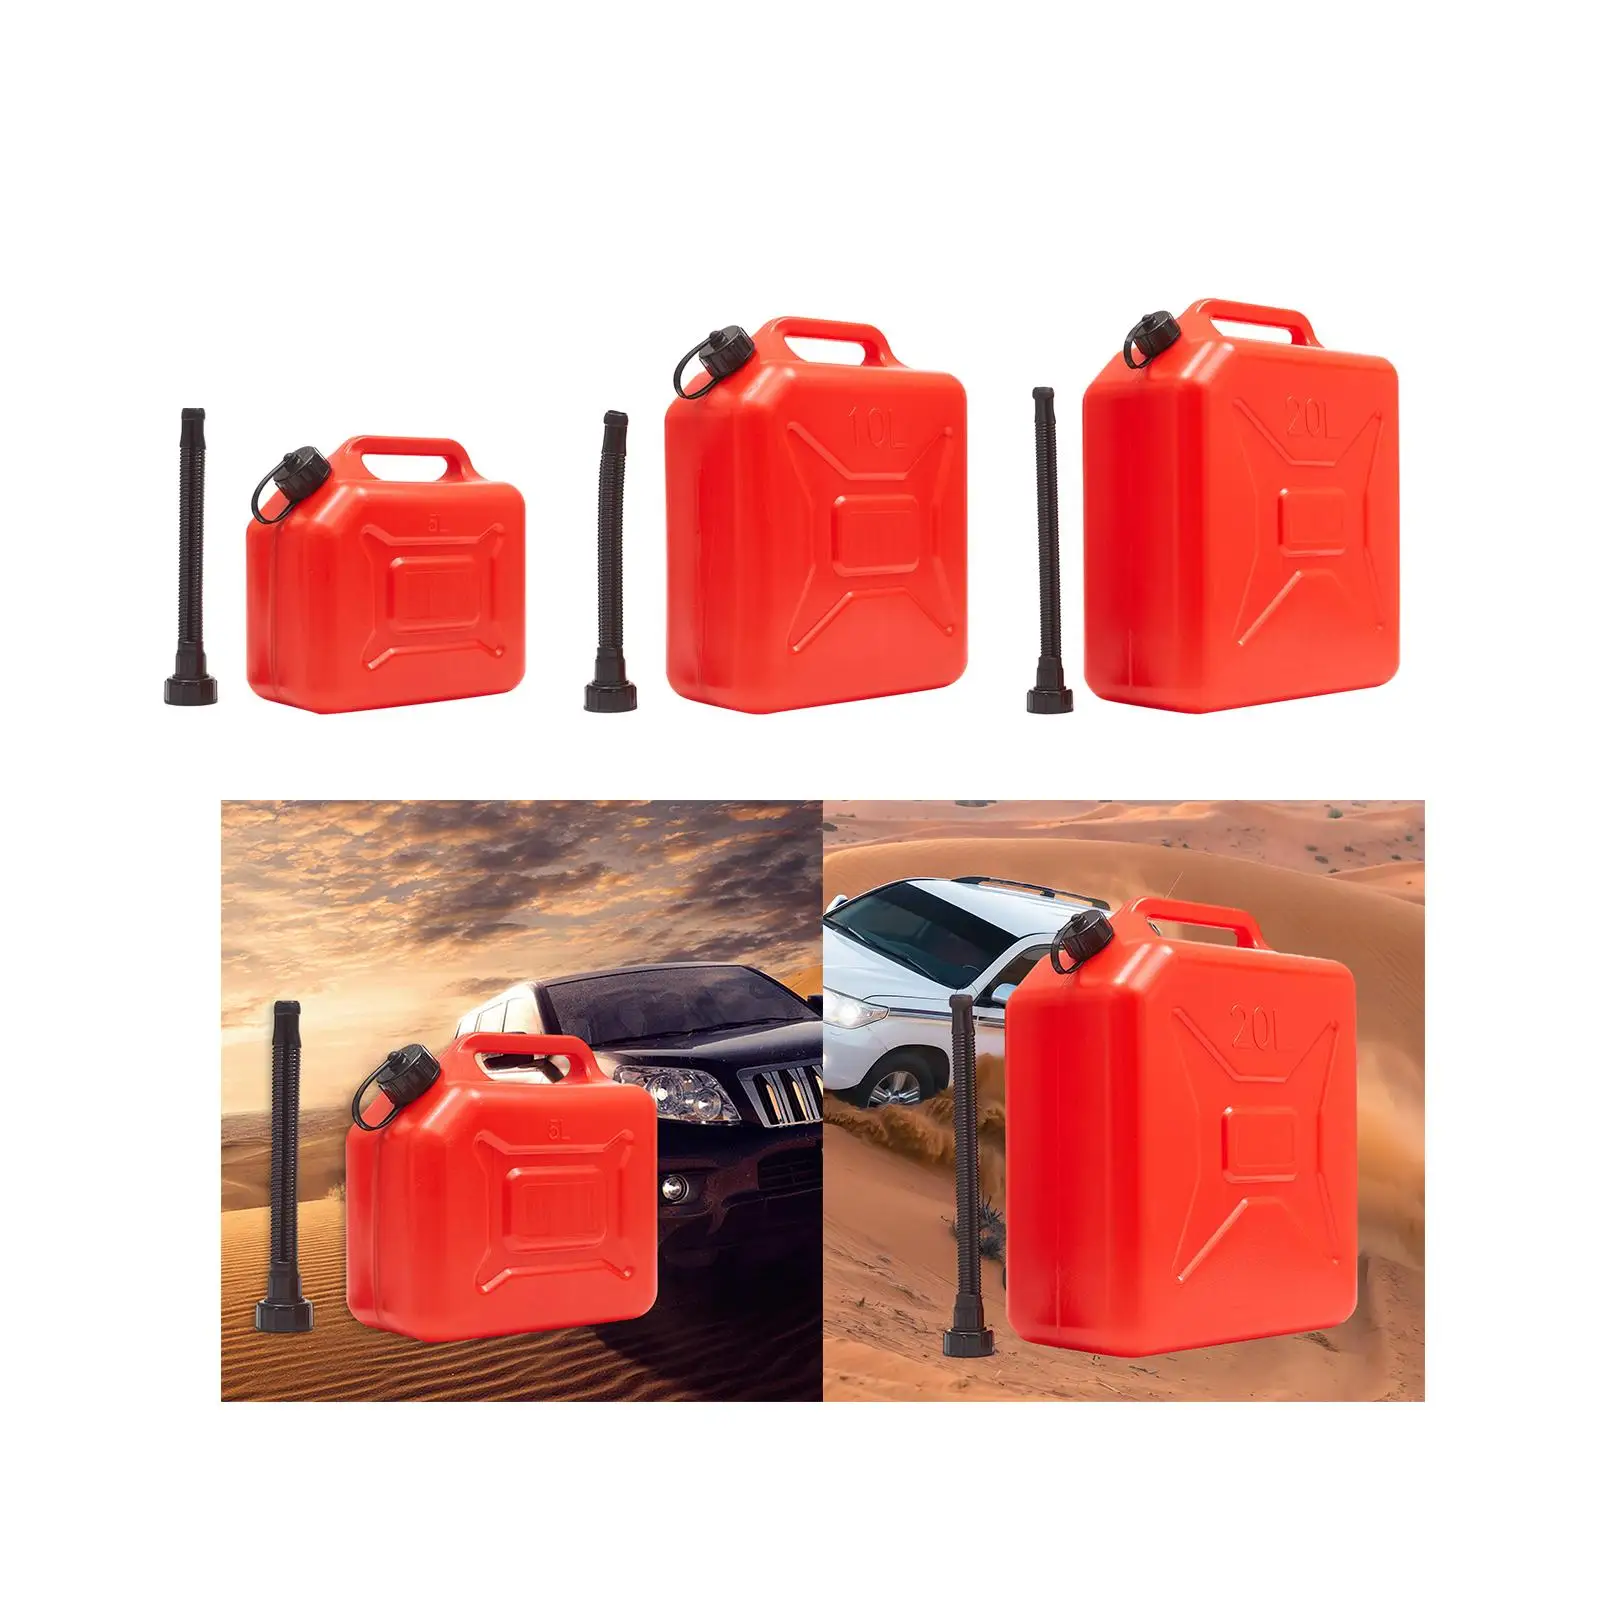 Fuel Container Gas Can Hdpe Car Gasoline Fuel Cans Bucket Fueling Tank